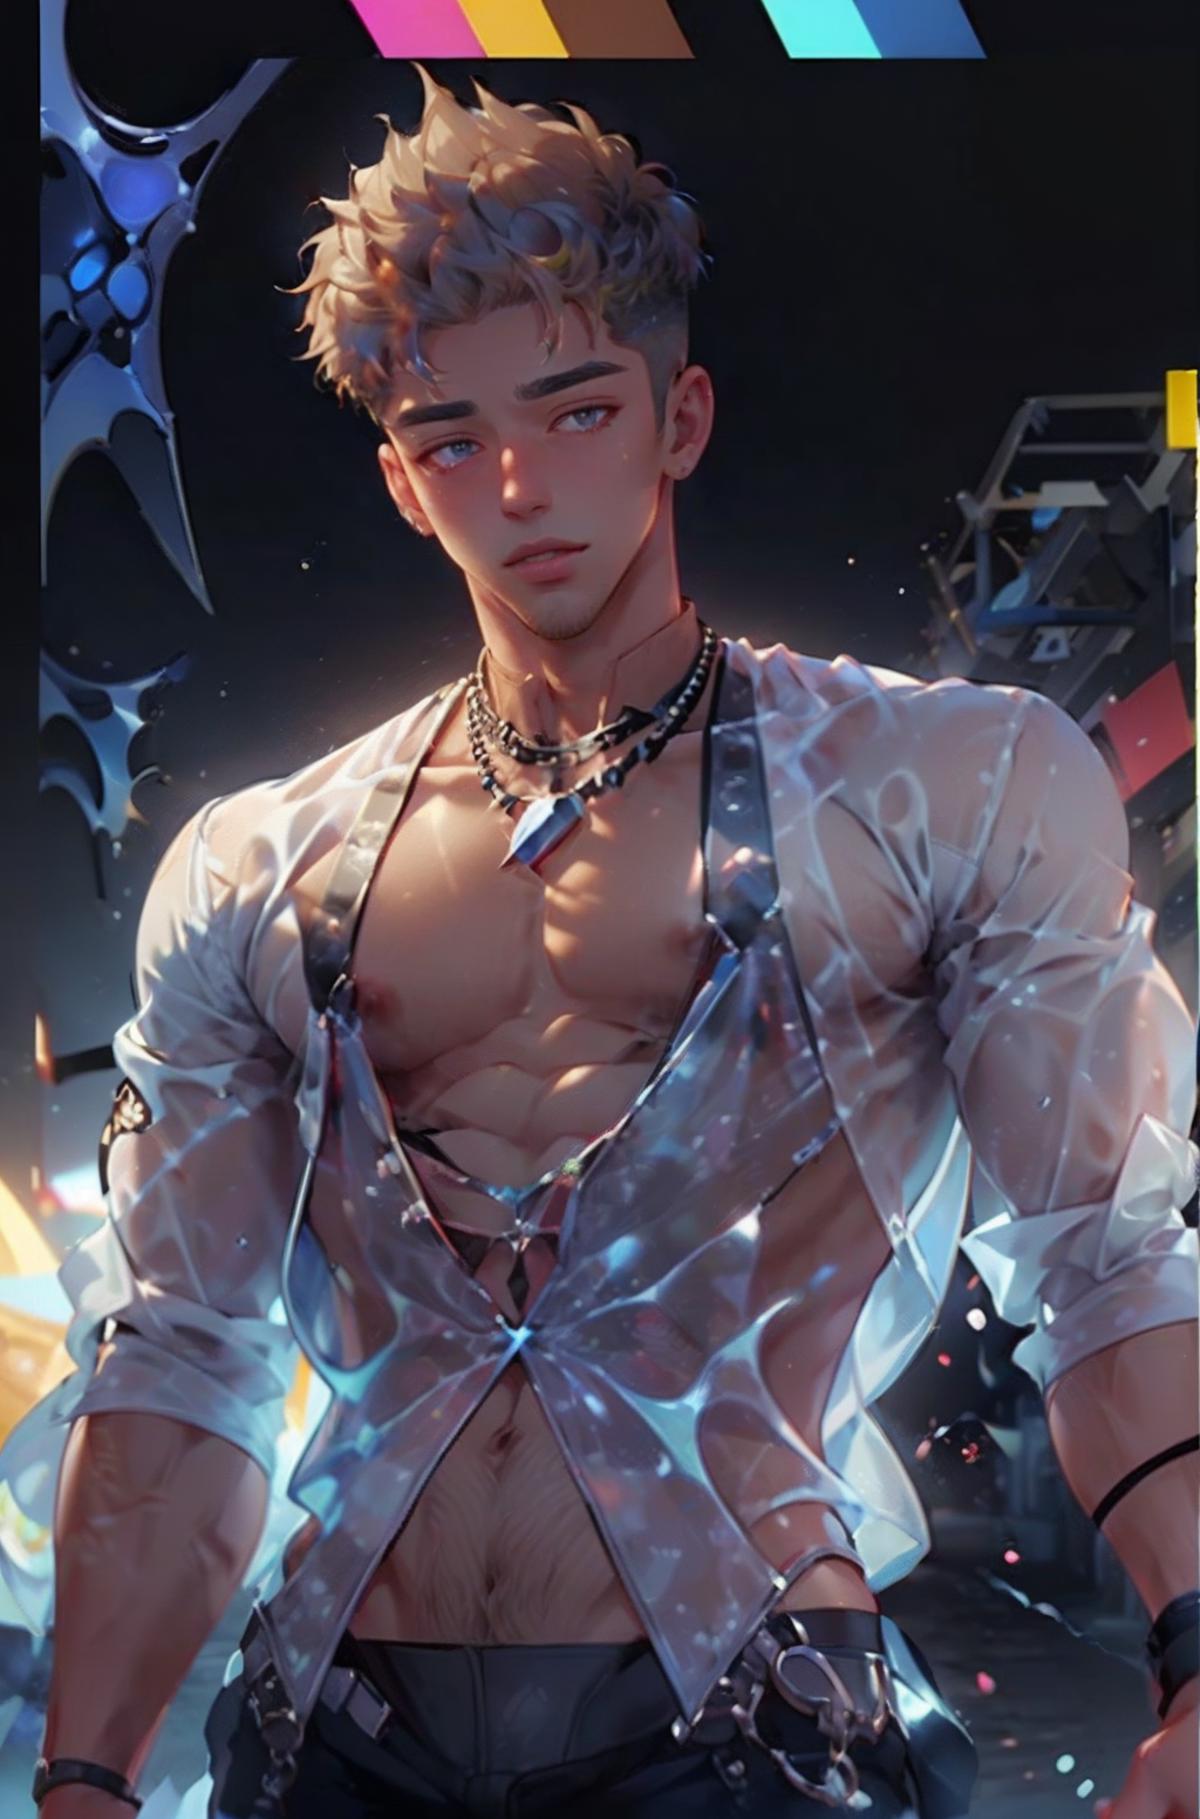 Anime drawing of a shirtless man with a chain around his neck, wearing a white shirt.